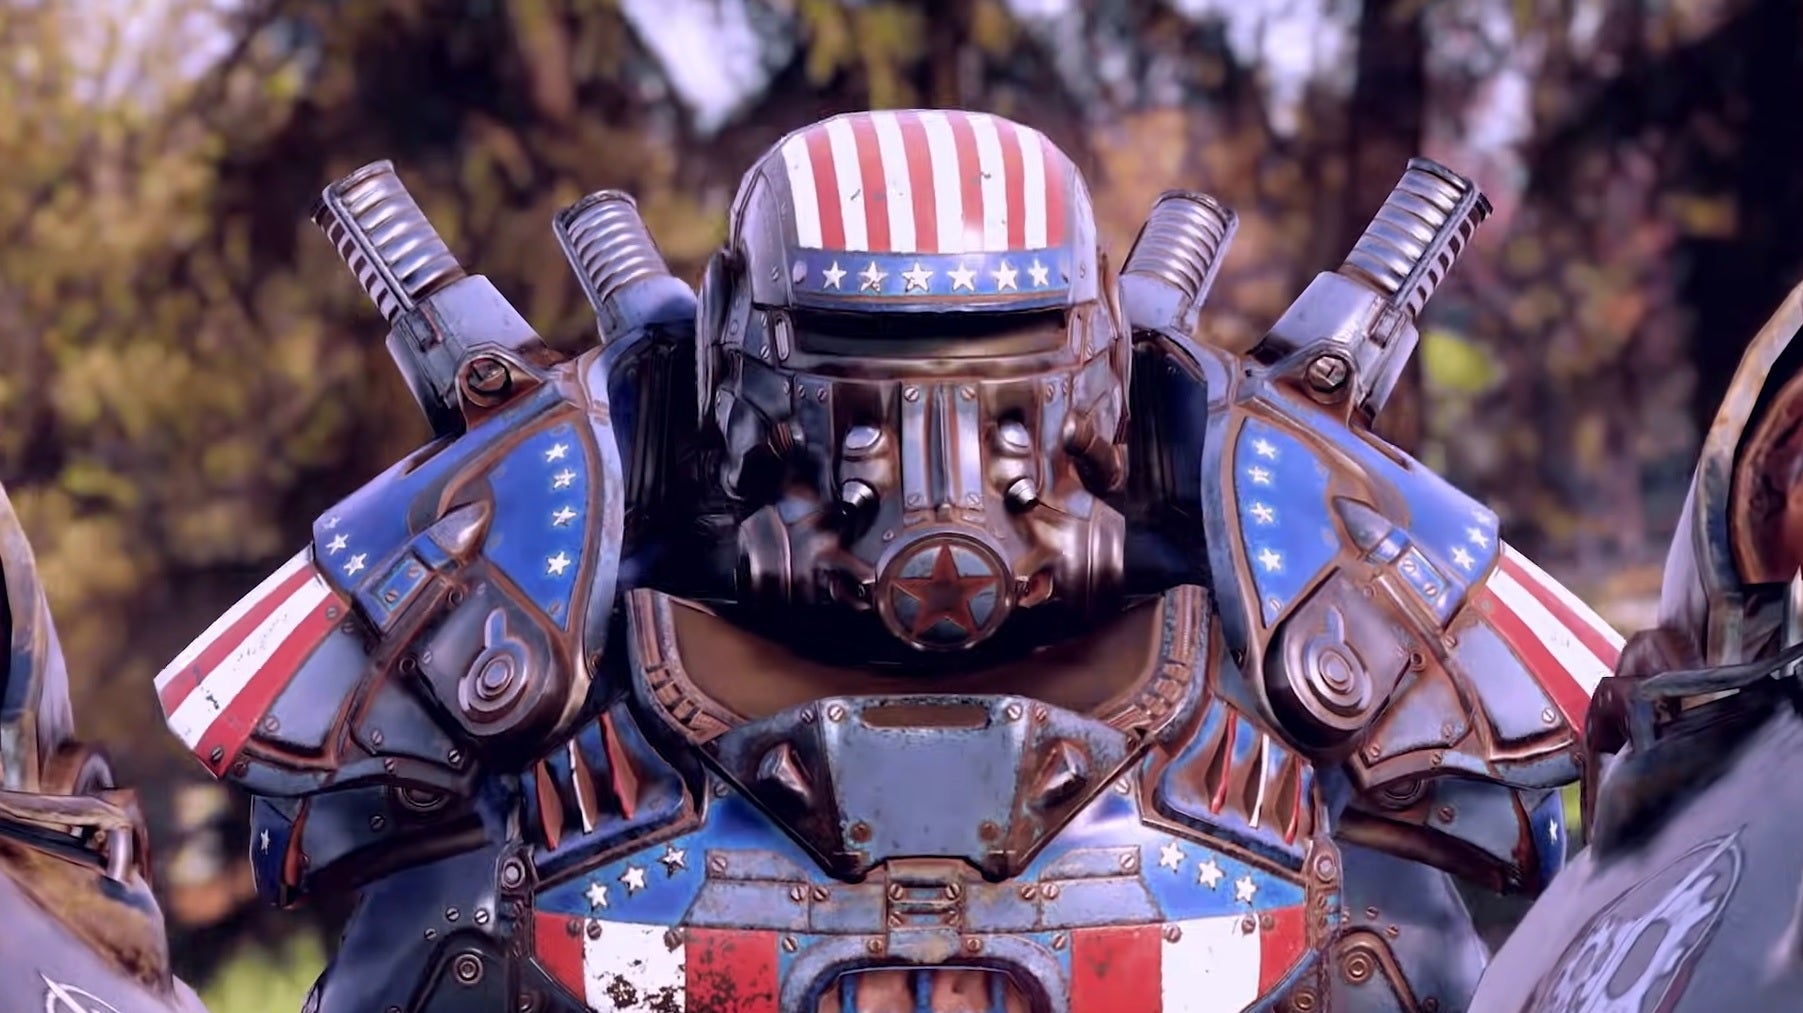 Fallout 76 - A character wearing power armor with an American flag paint job